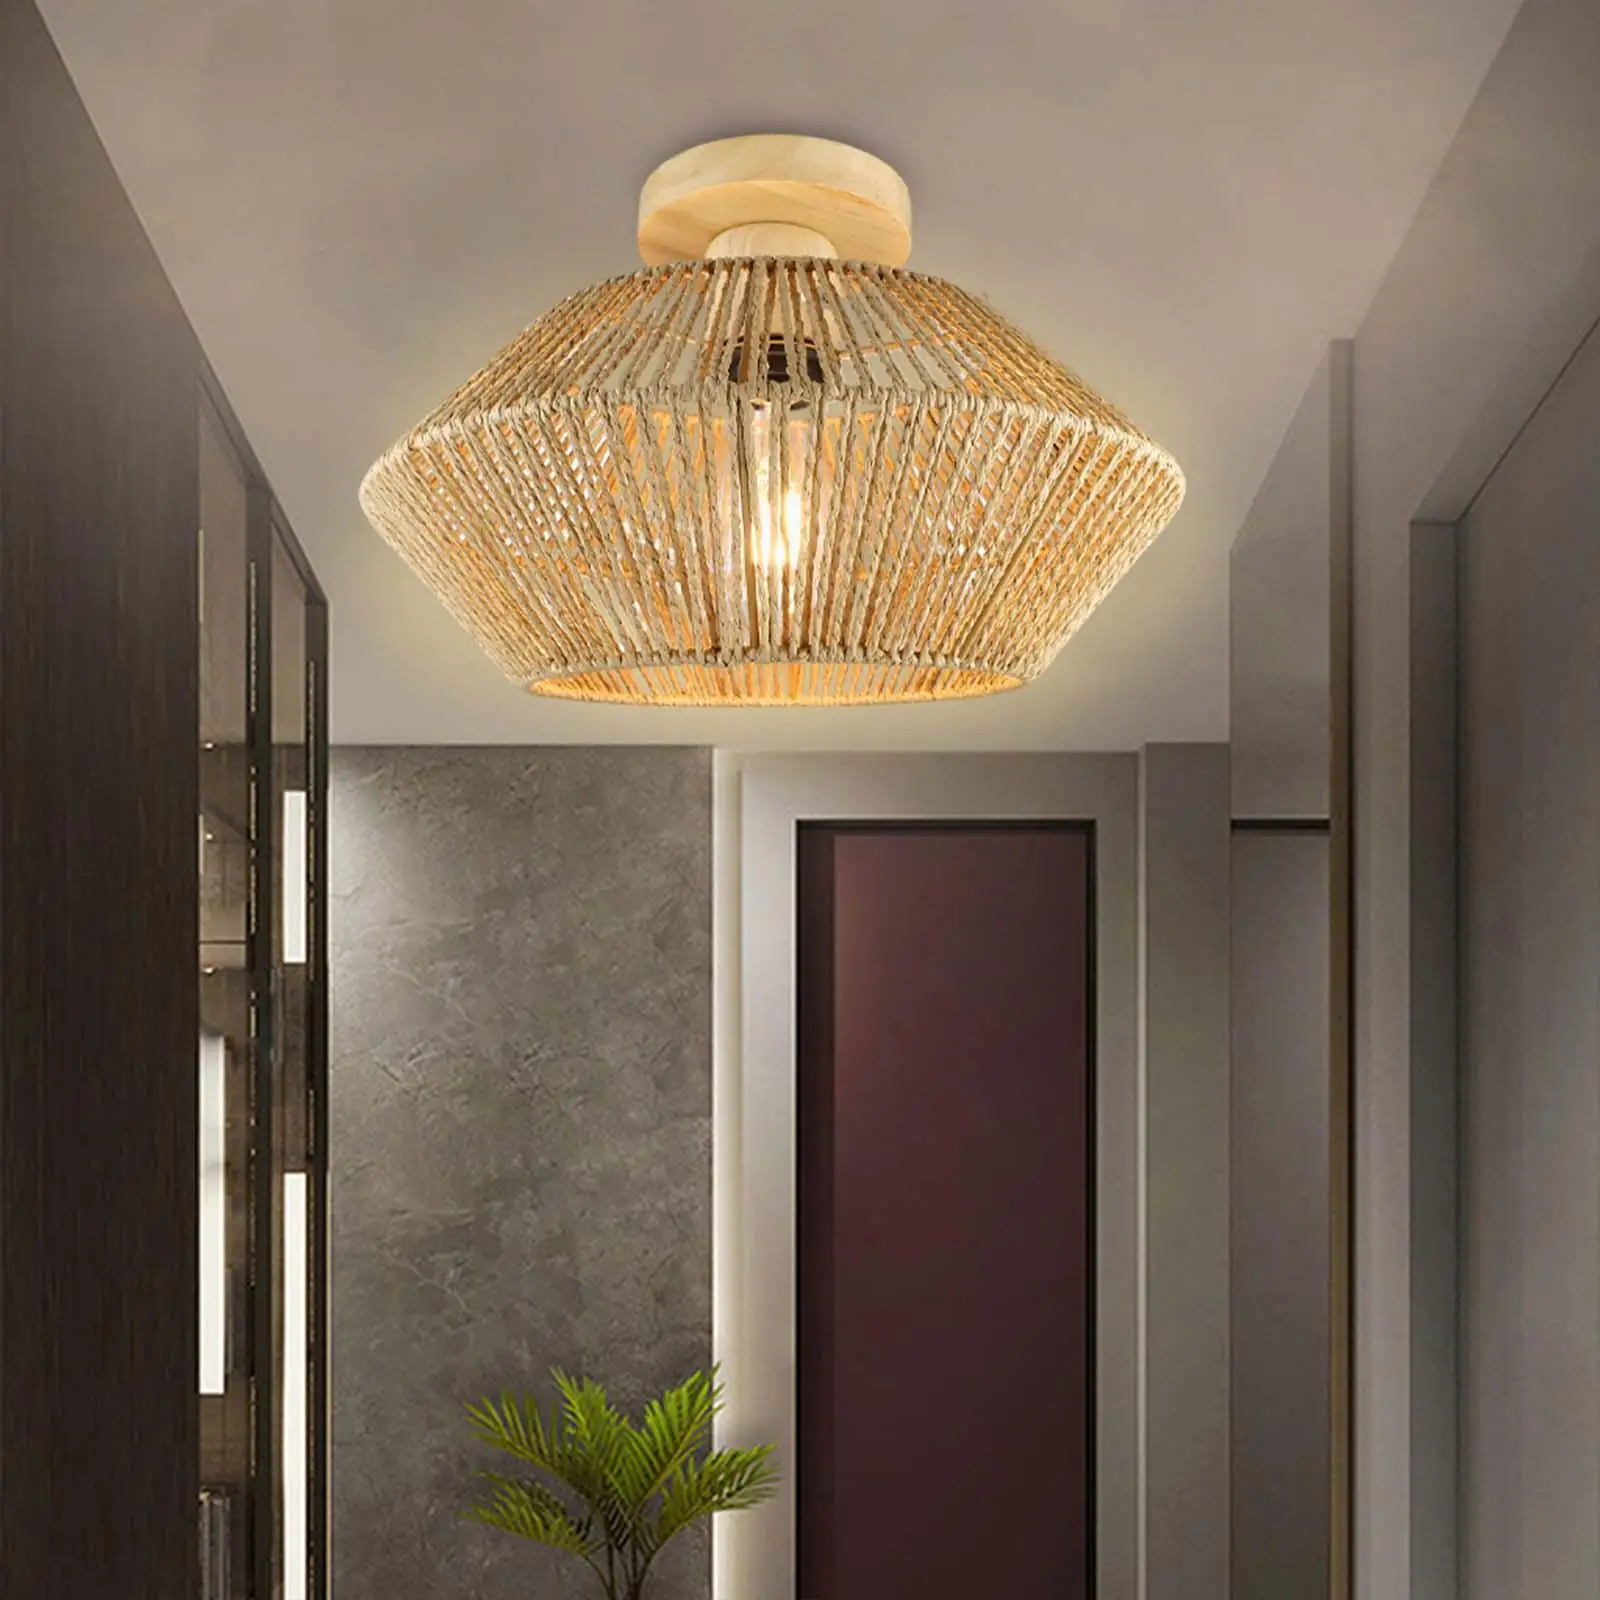 Handwoven LED Ceiling Pendant Light Shade Lighting Fixture Decorative Light Cover for Apartment Living Room Laundry Office Hotel